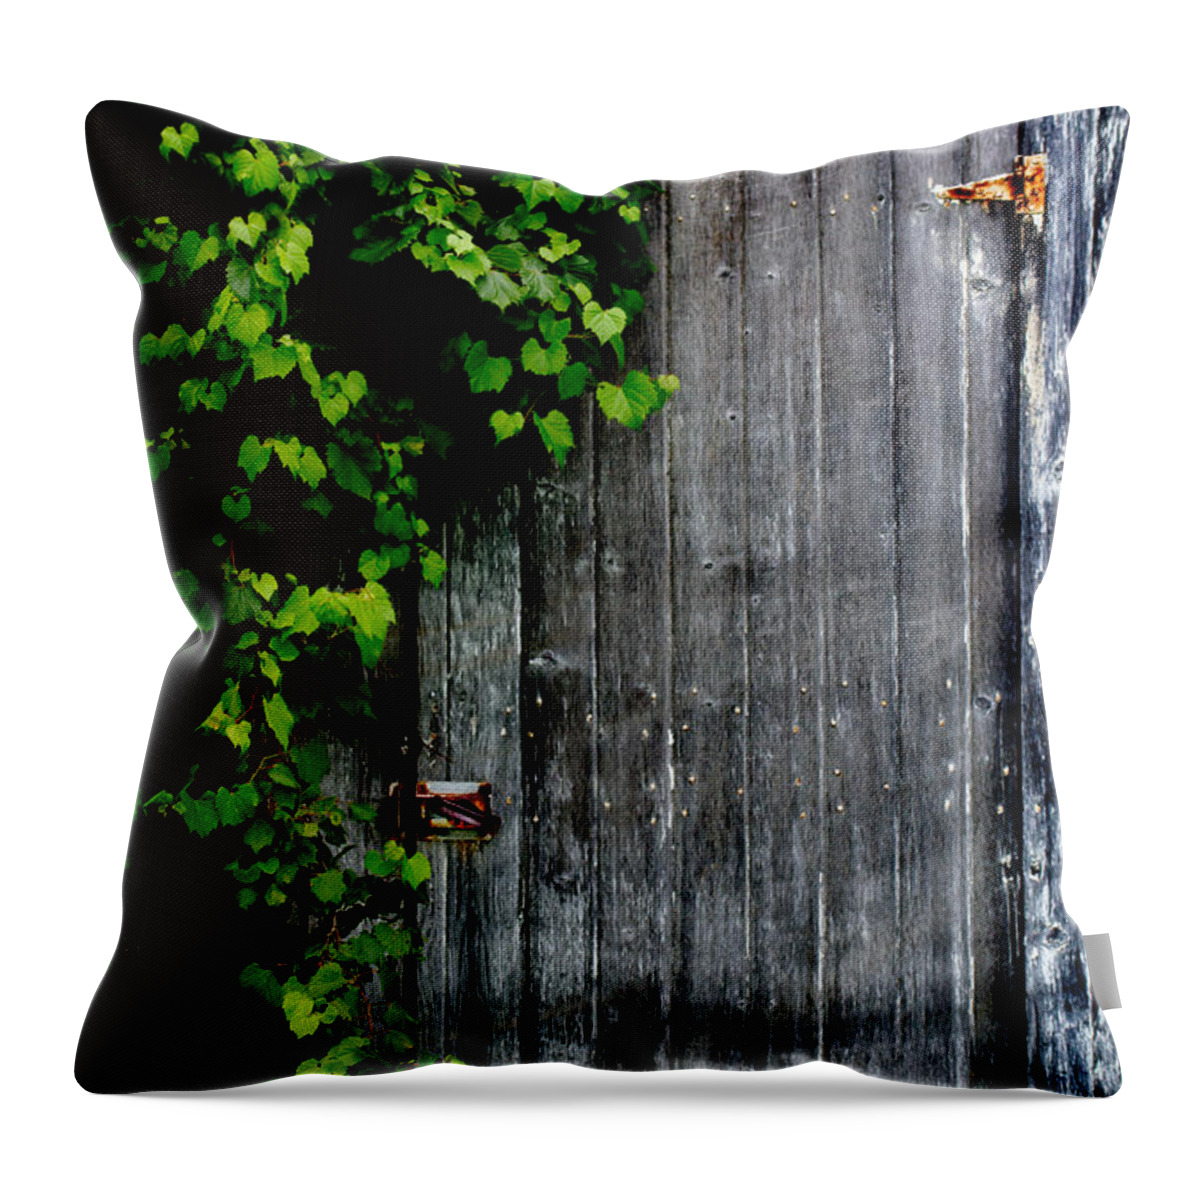 Barn Throw Pillow featuring the photograph Wild Grape Vine Door by Michael Arend